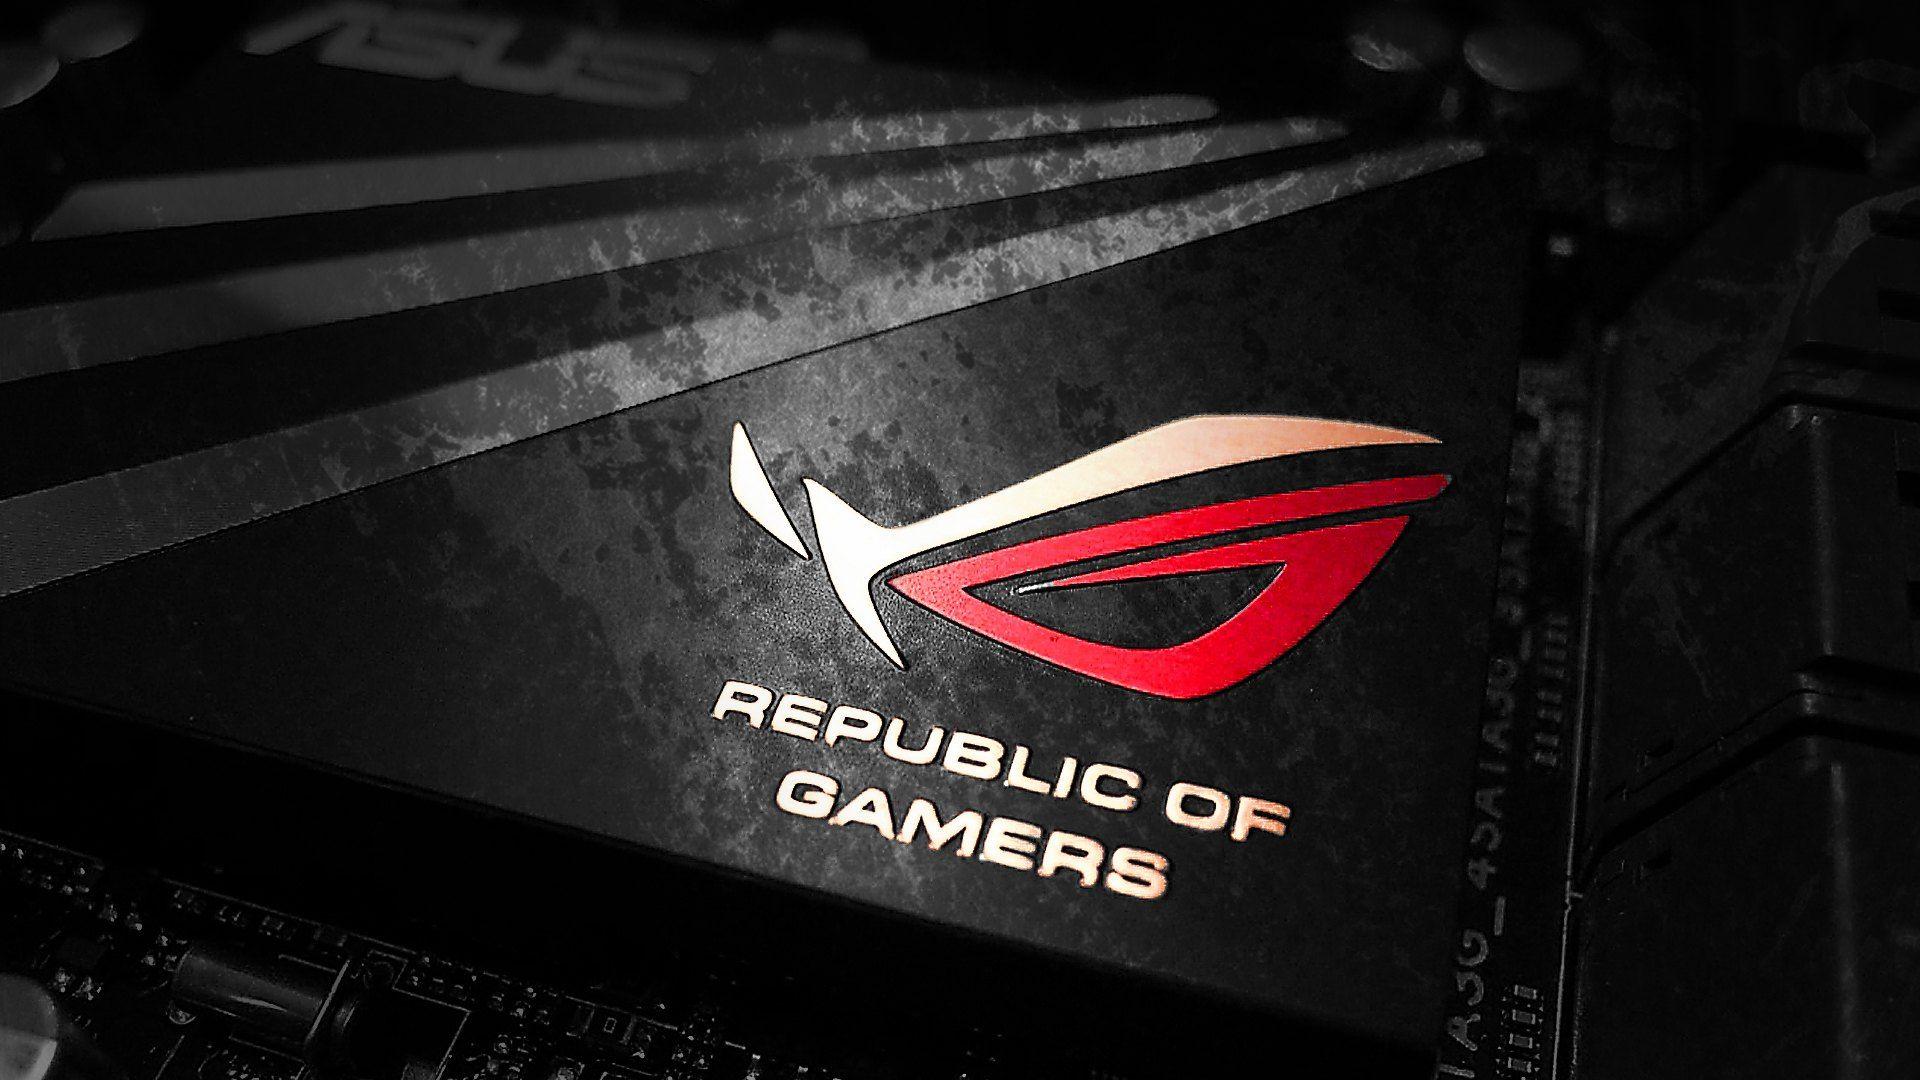 ROG Wallpaper Collection 2012